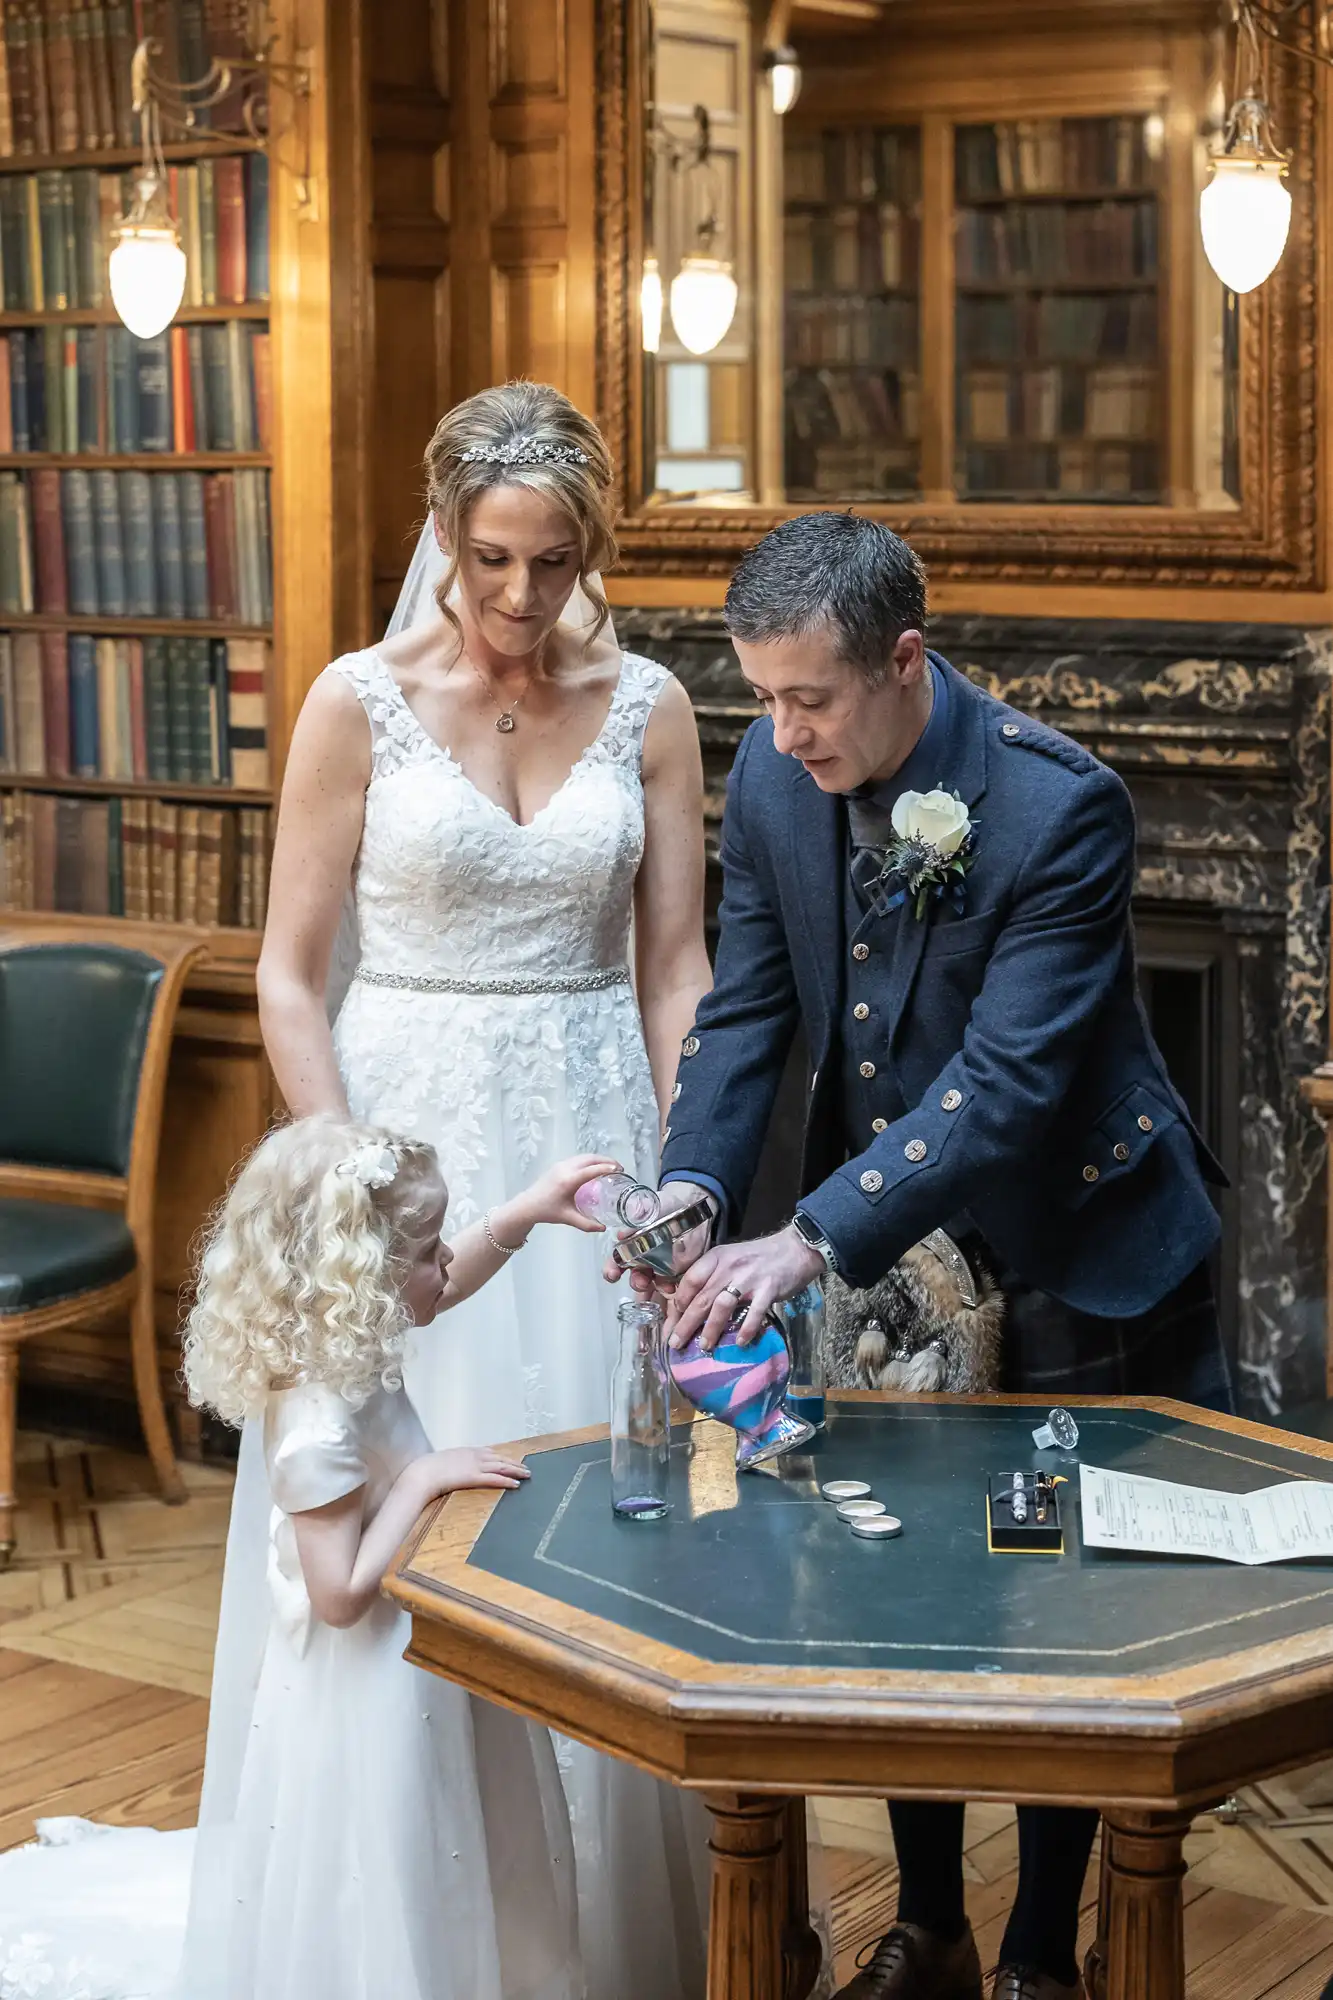 A bride and groom, dressed in wedding attire, are pouring sand into a bottle with a young girl in a formal setting with bookshelves and a fireplace in the background.